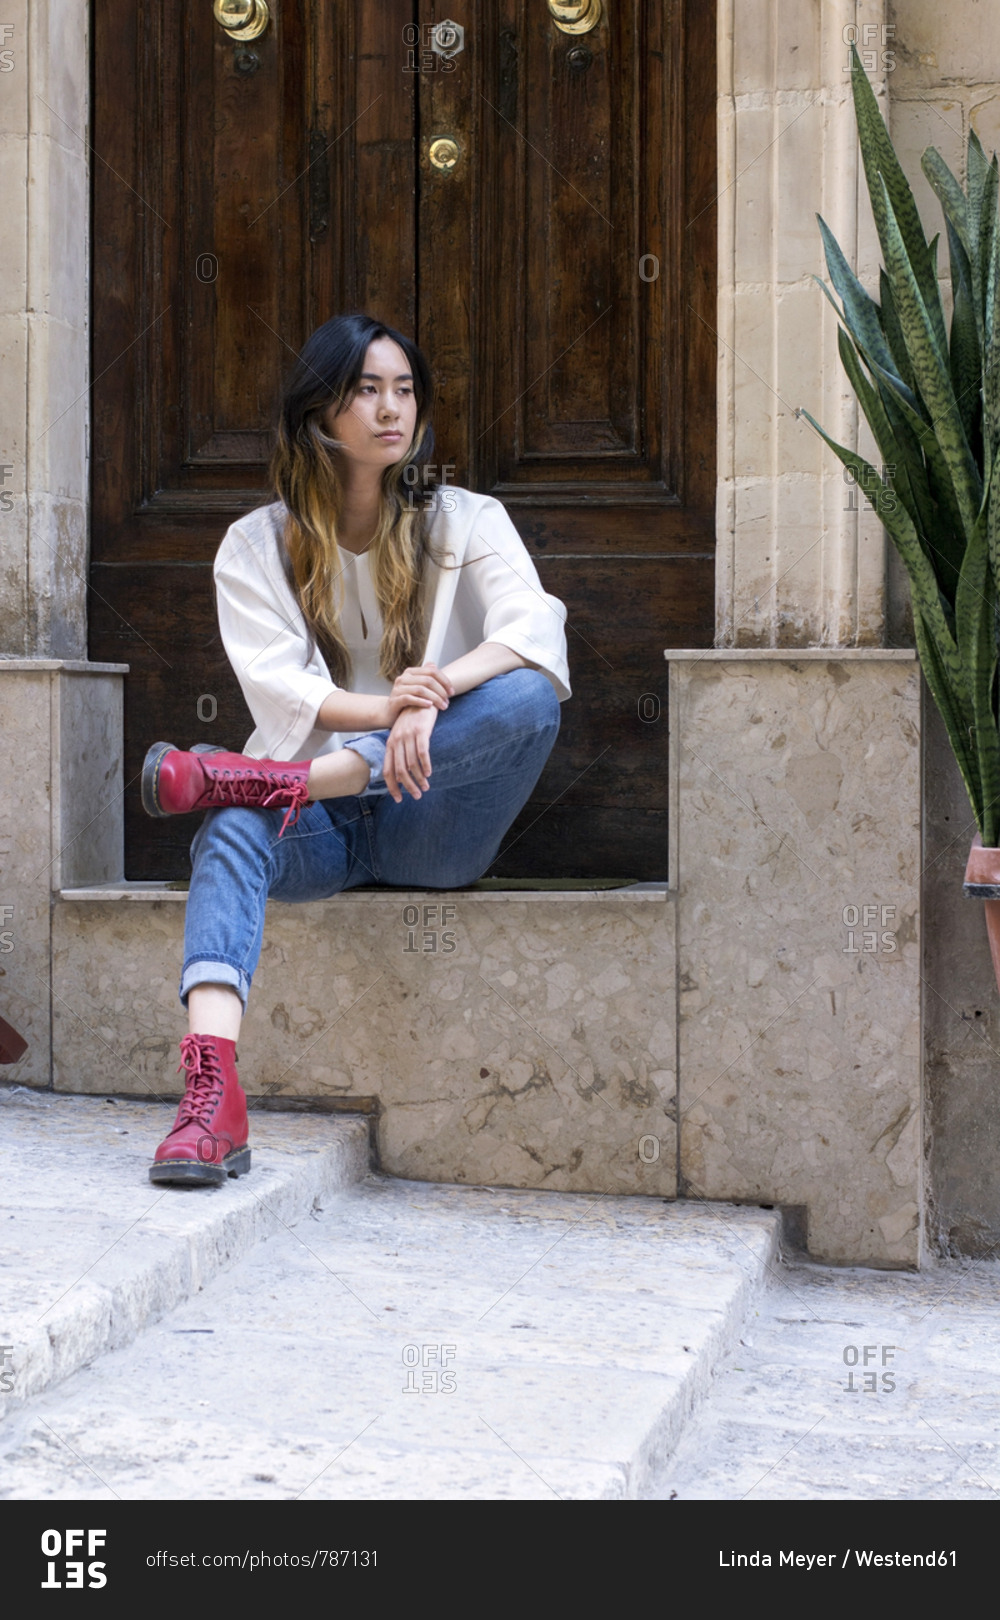 Portrait of young woman wearing red boots sitting on step in front of entry door